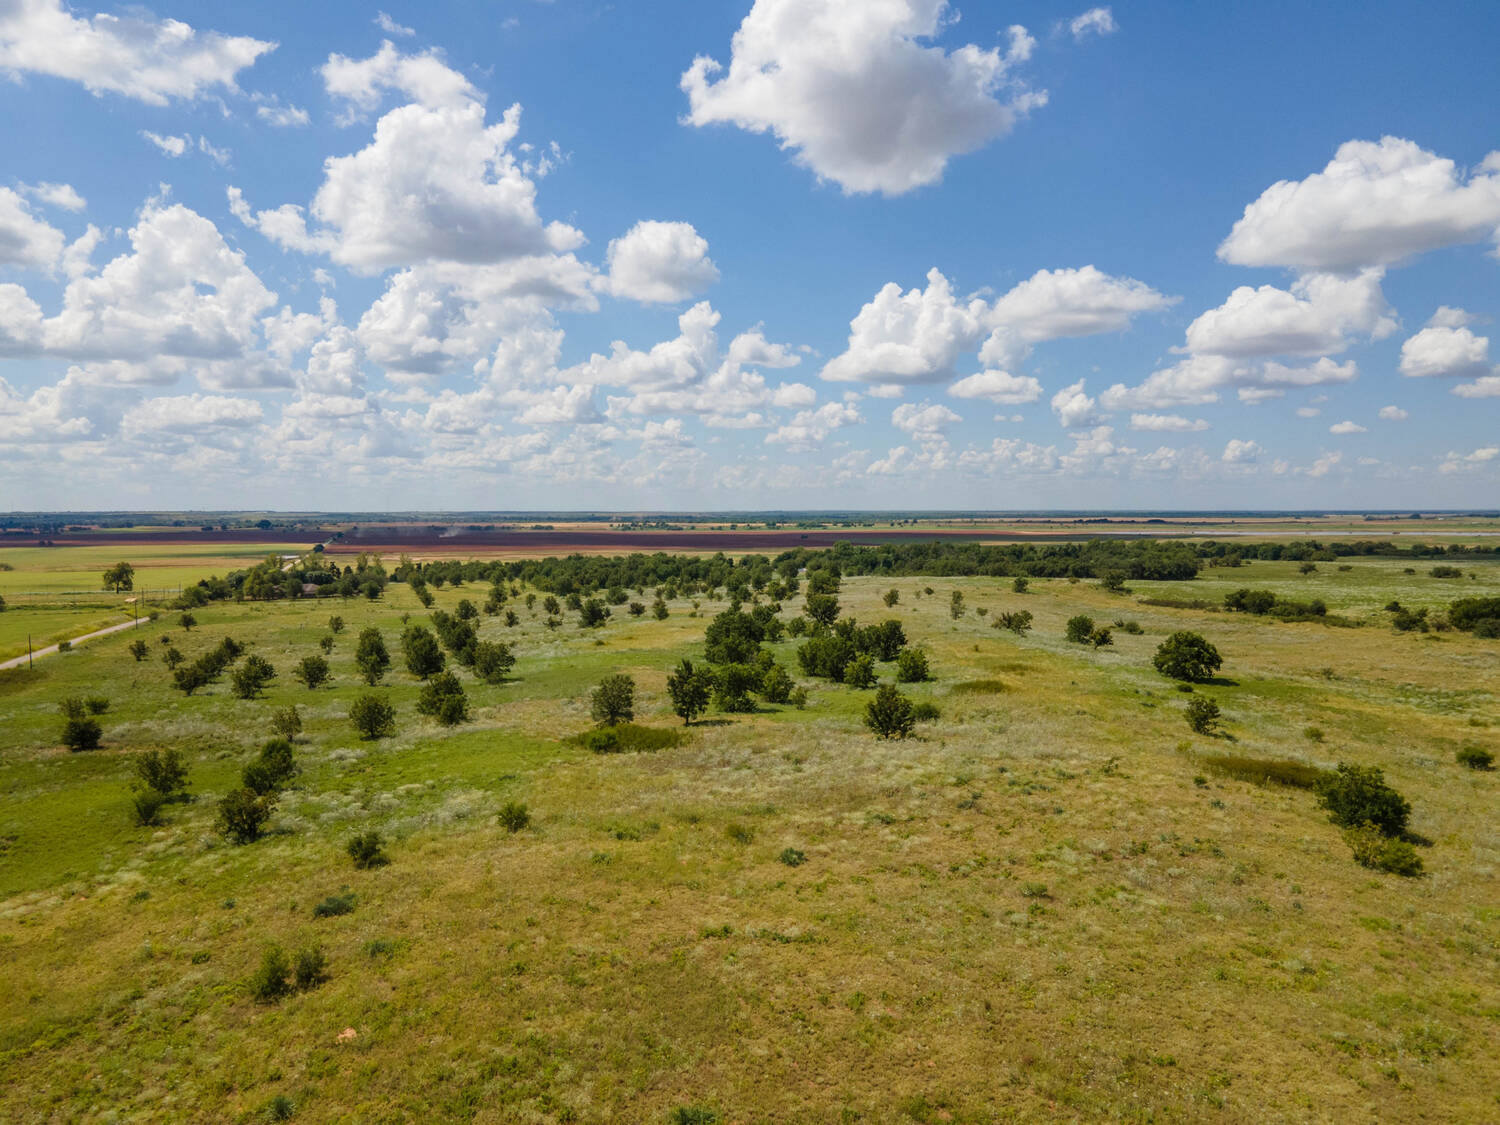 The-Pecan-Tract-Clay-County-Pecan-Orchard-Hunting-Ranch-TX-Republic-Ranches-Bryan-Pickens-4-of-15